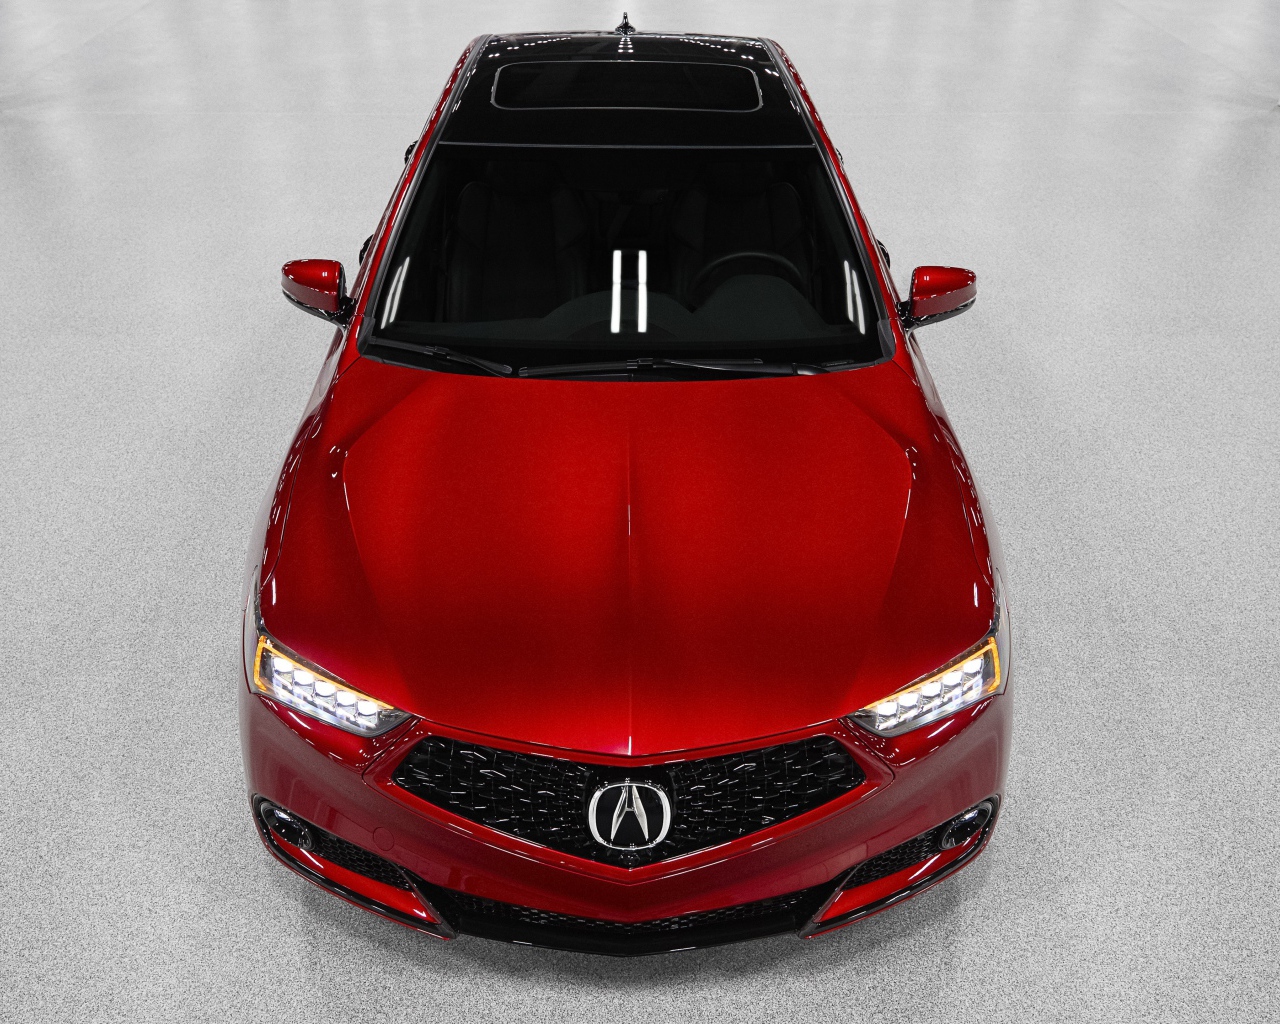 Red car Acura TLX PMC Edition 2020 top view